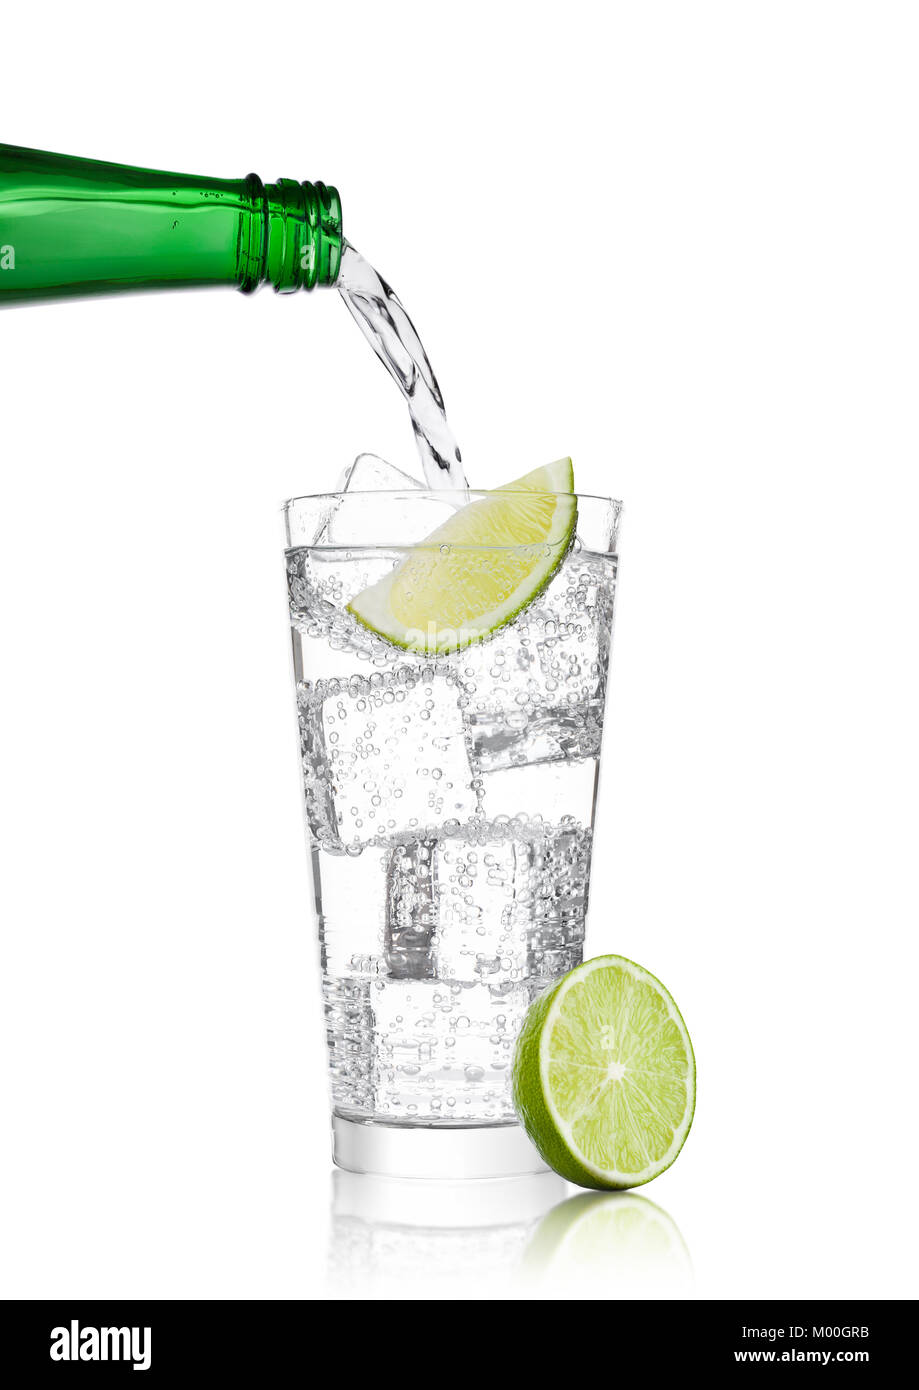 Pouring lemonade soda drink sparkling water from bottle to glass with lime  Stock Photo - Alamy